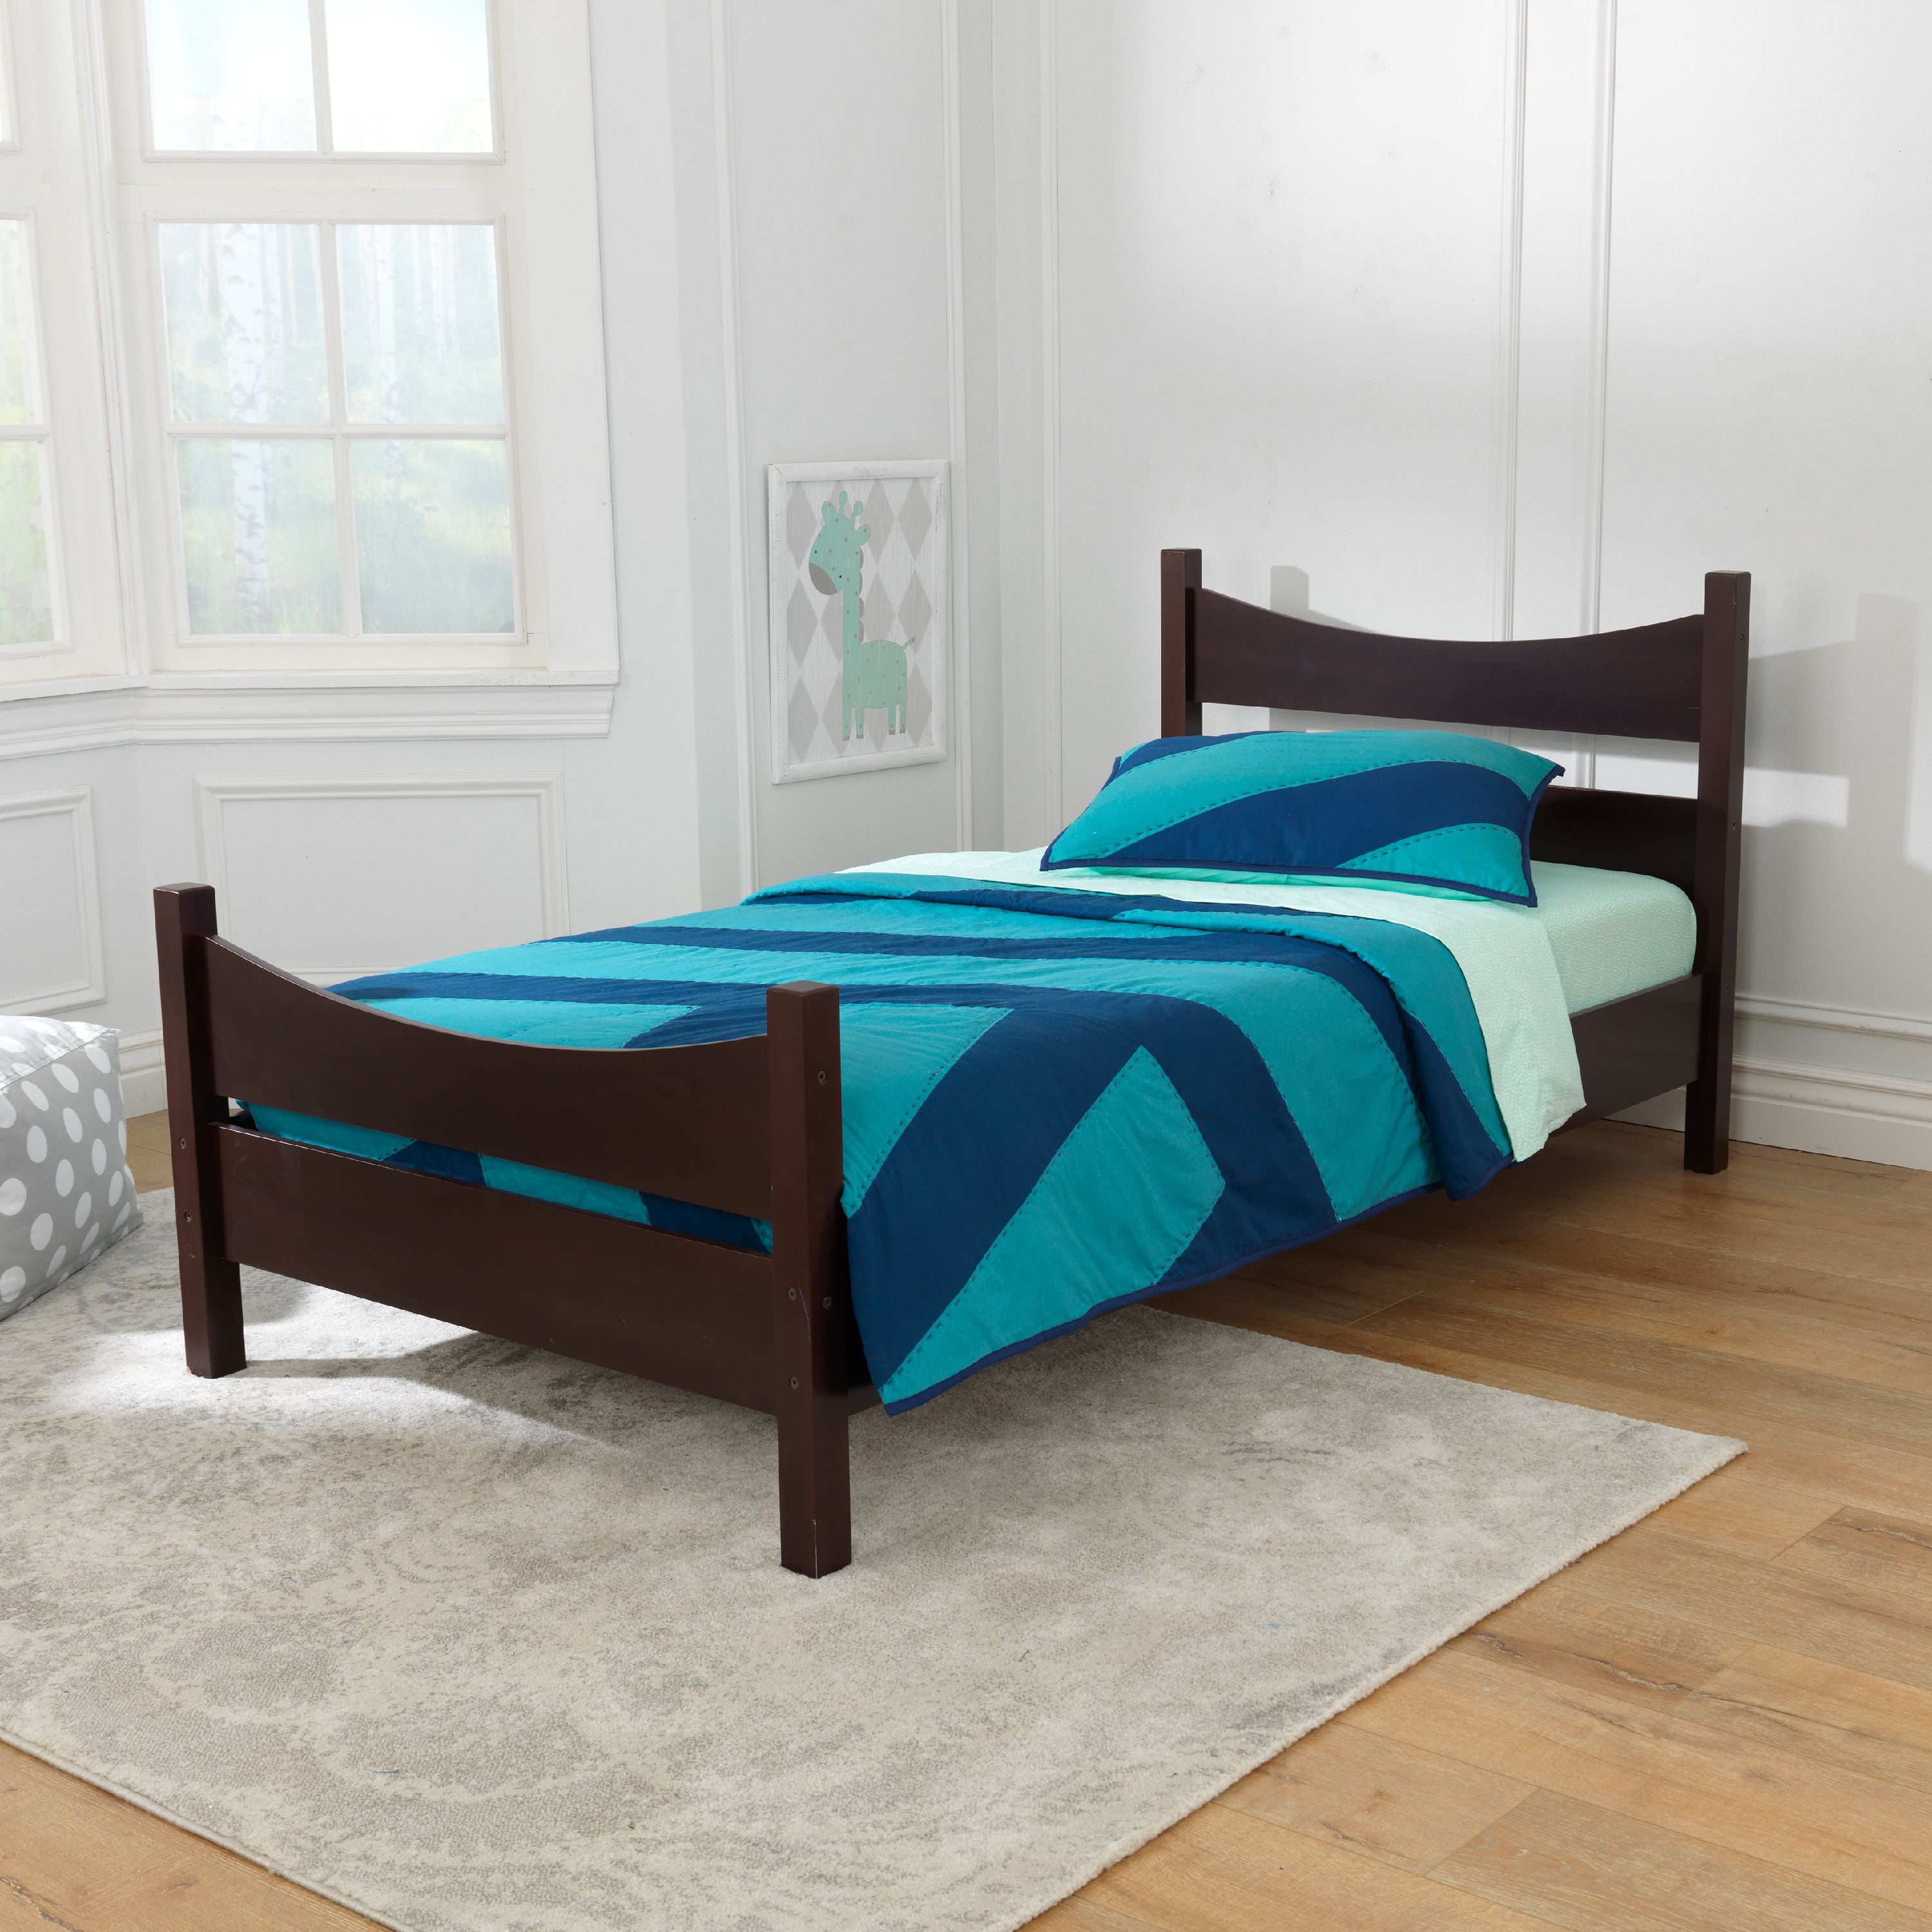 boy twin beds for cheap